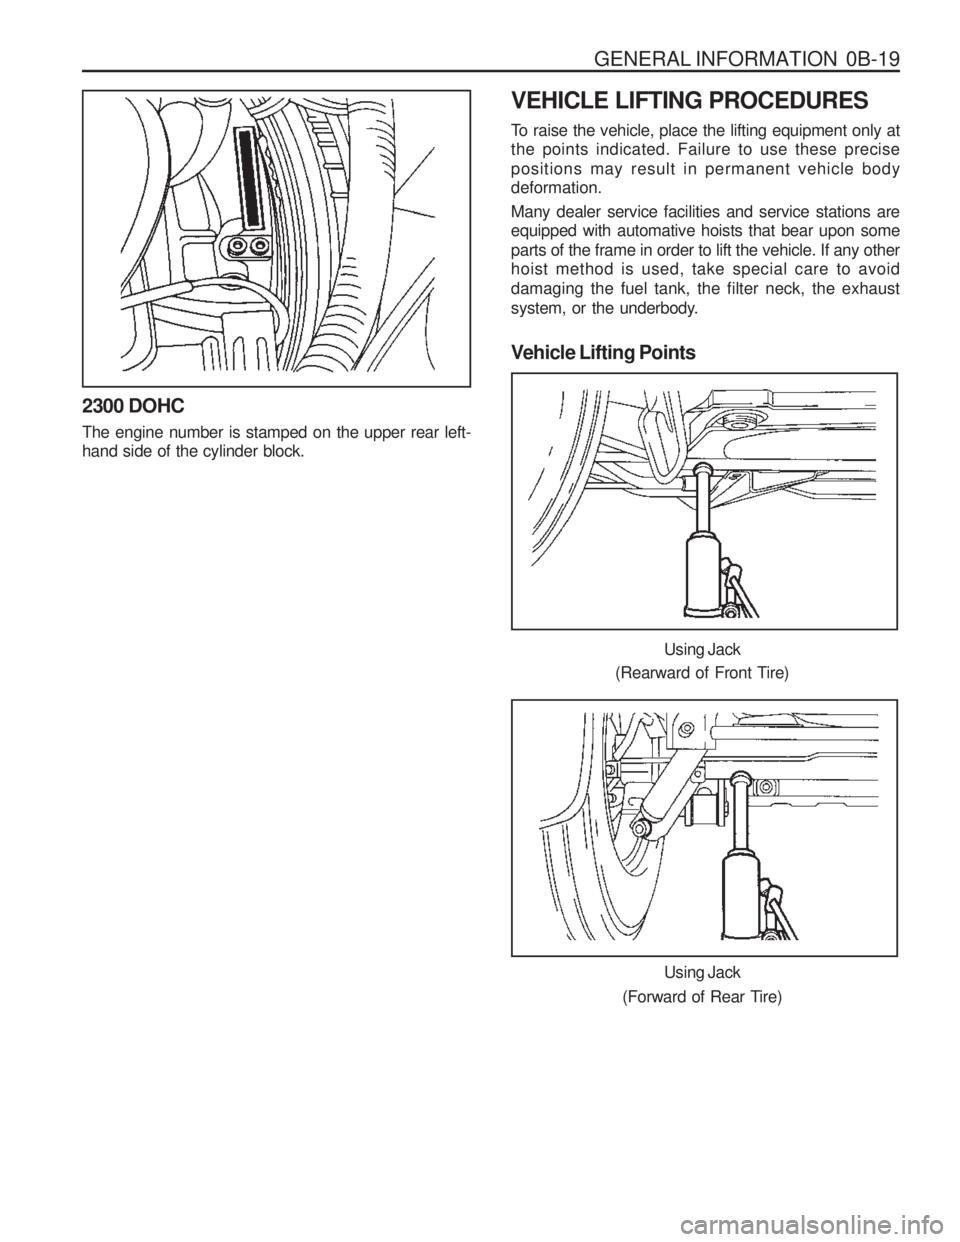 SSANGYONG MUSSO 2003  Service Manual GENERAL INFORMATION  0B-19
VEHICLE LIFTING PROCEDURES 
To raise the vehicle, place the lifting equipment only at the points indicated. Failure to use these precise positions may result in permanent ve